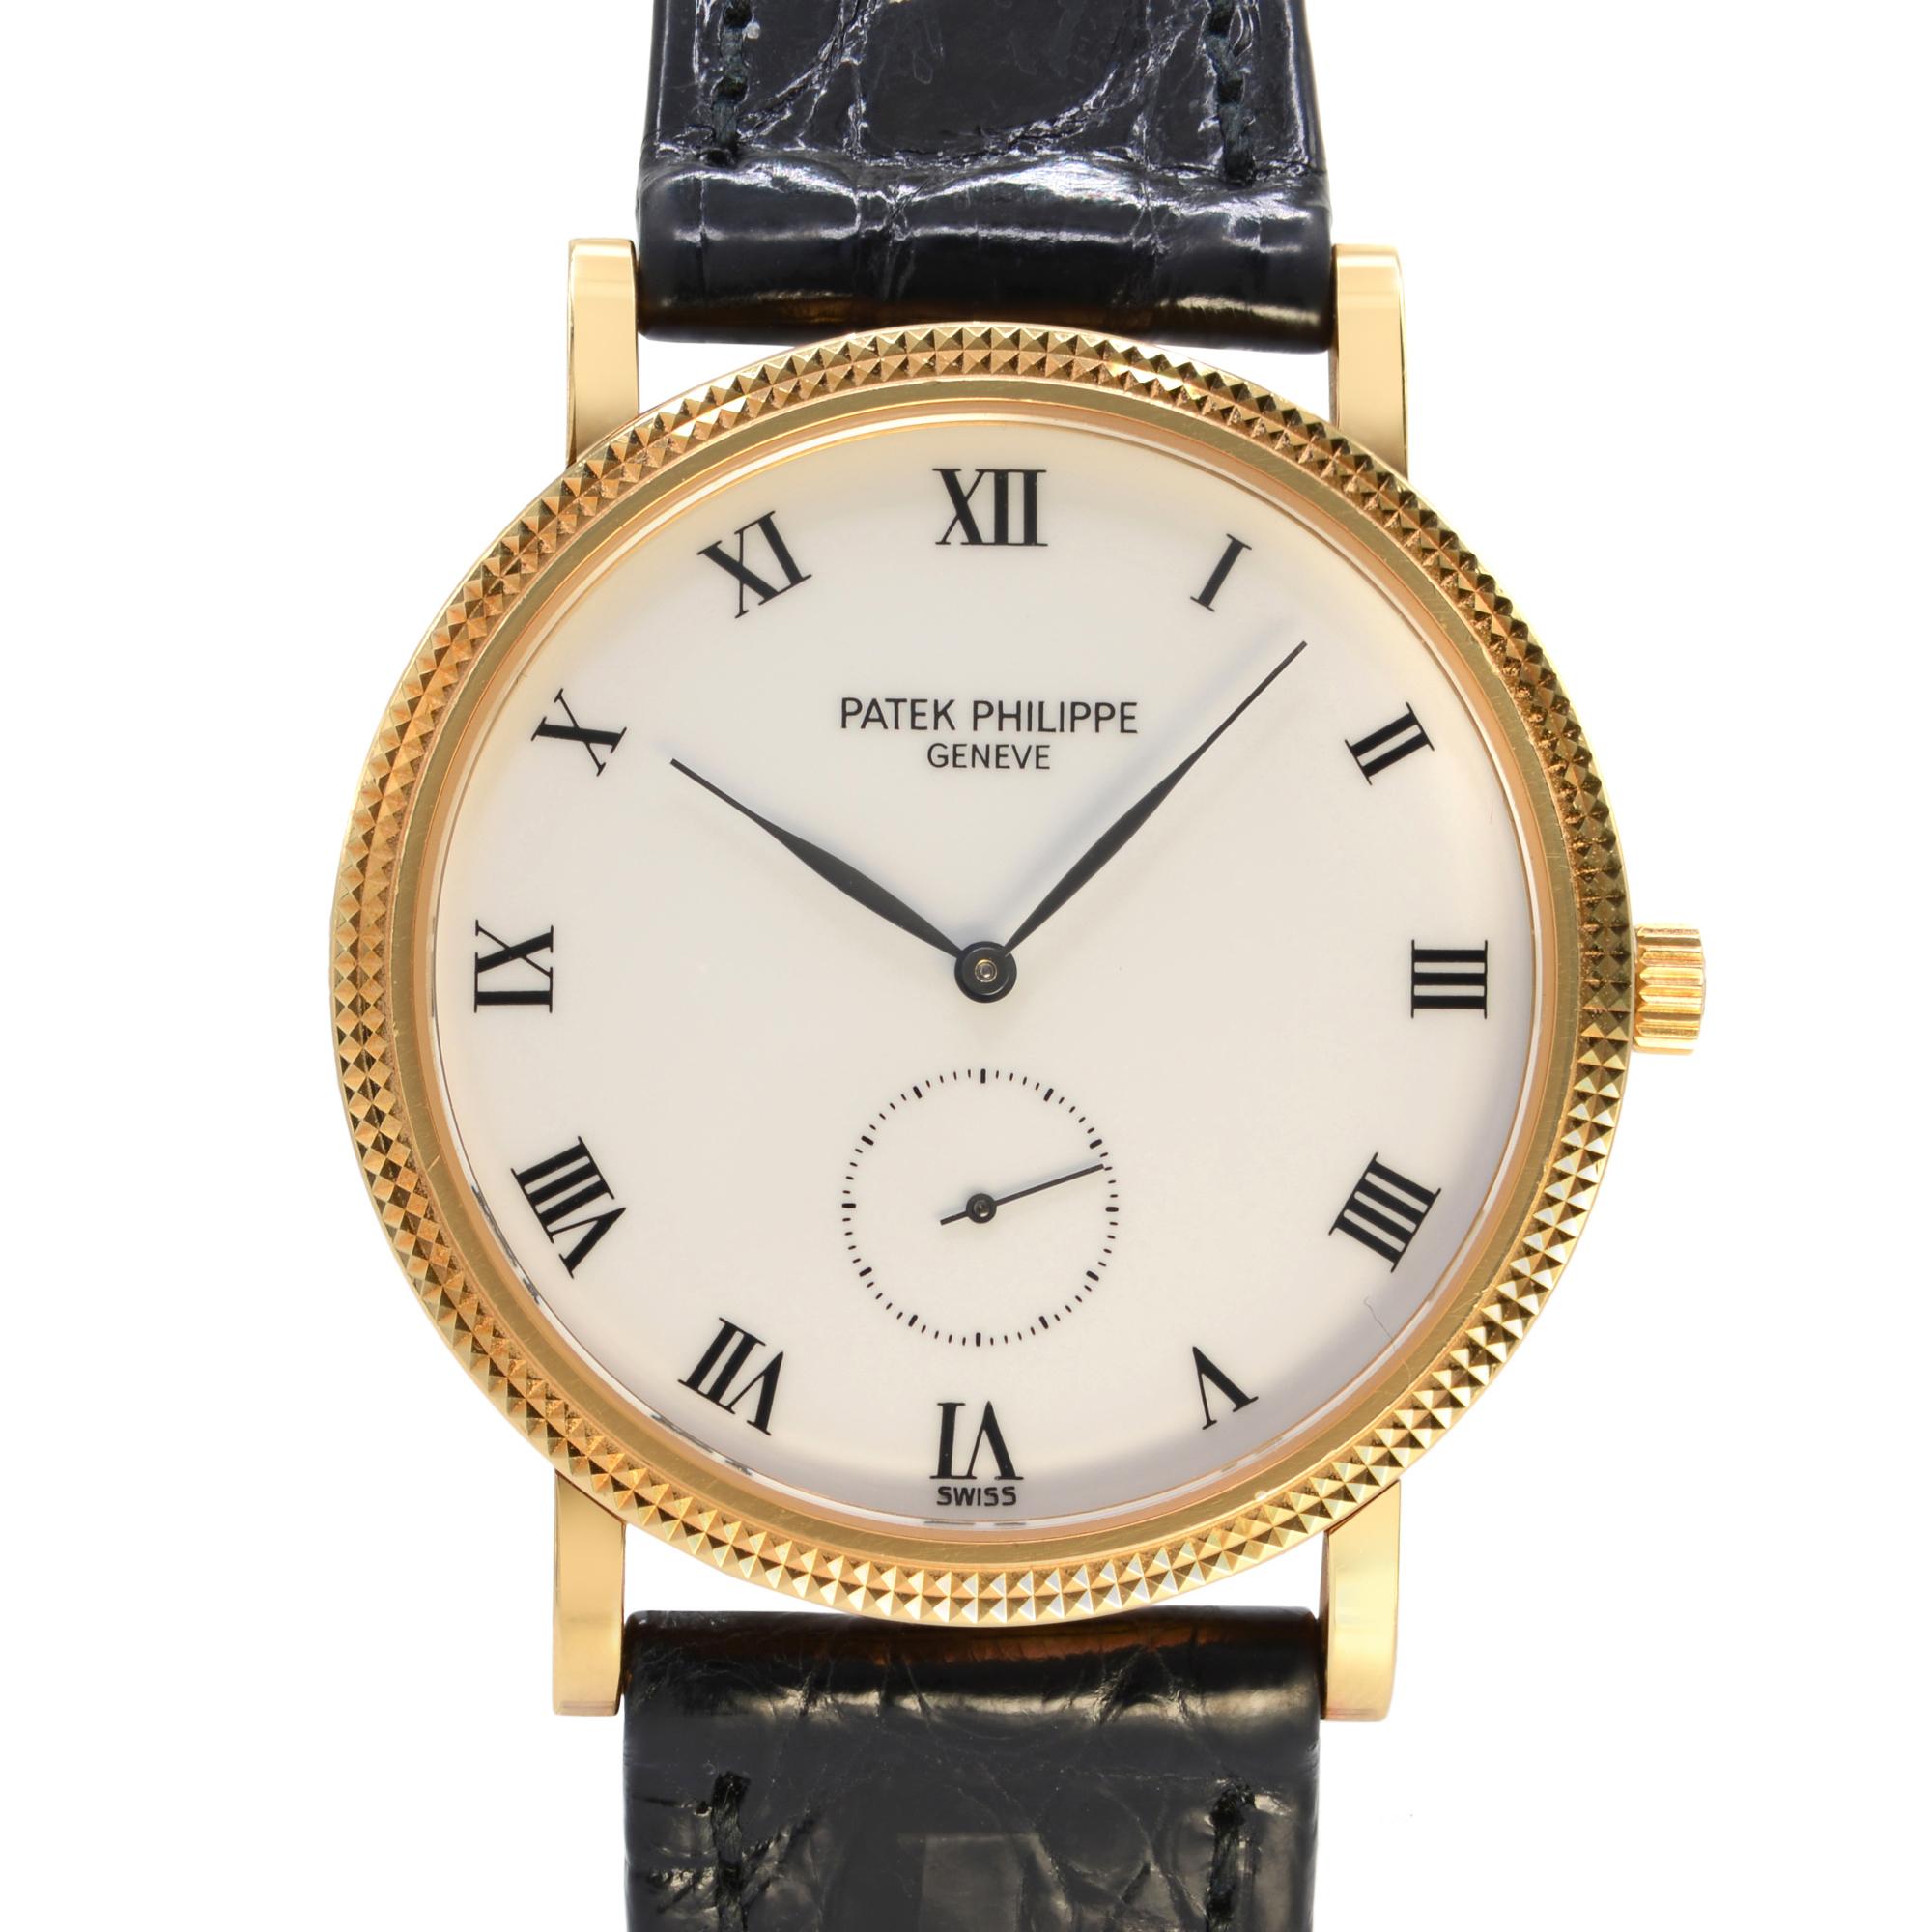 Pre-Owned Patek Philippe Calatrava 33 mm 18k Yellow  Gold White Dial Men's Hand-Wind Watch 3919J. The Watch is powered by Hand Winding Movement and Features: an 18k Yellow Gold Round Case and Two-Piece Leather Strap. Fixed Gold Bezel. White Dial